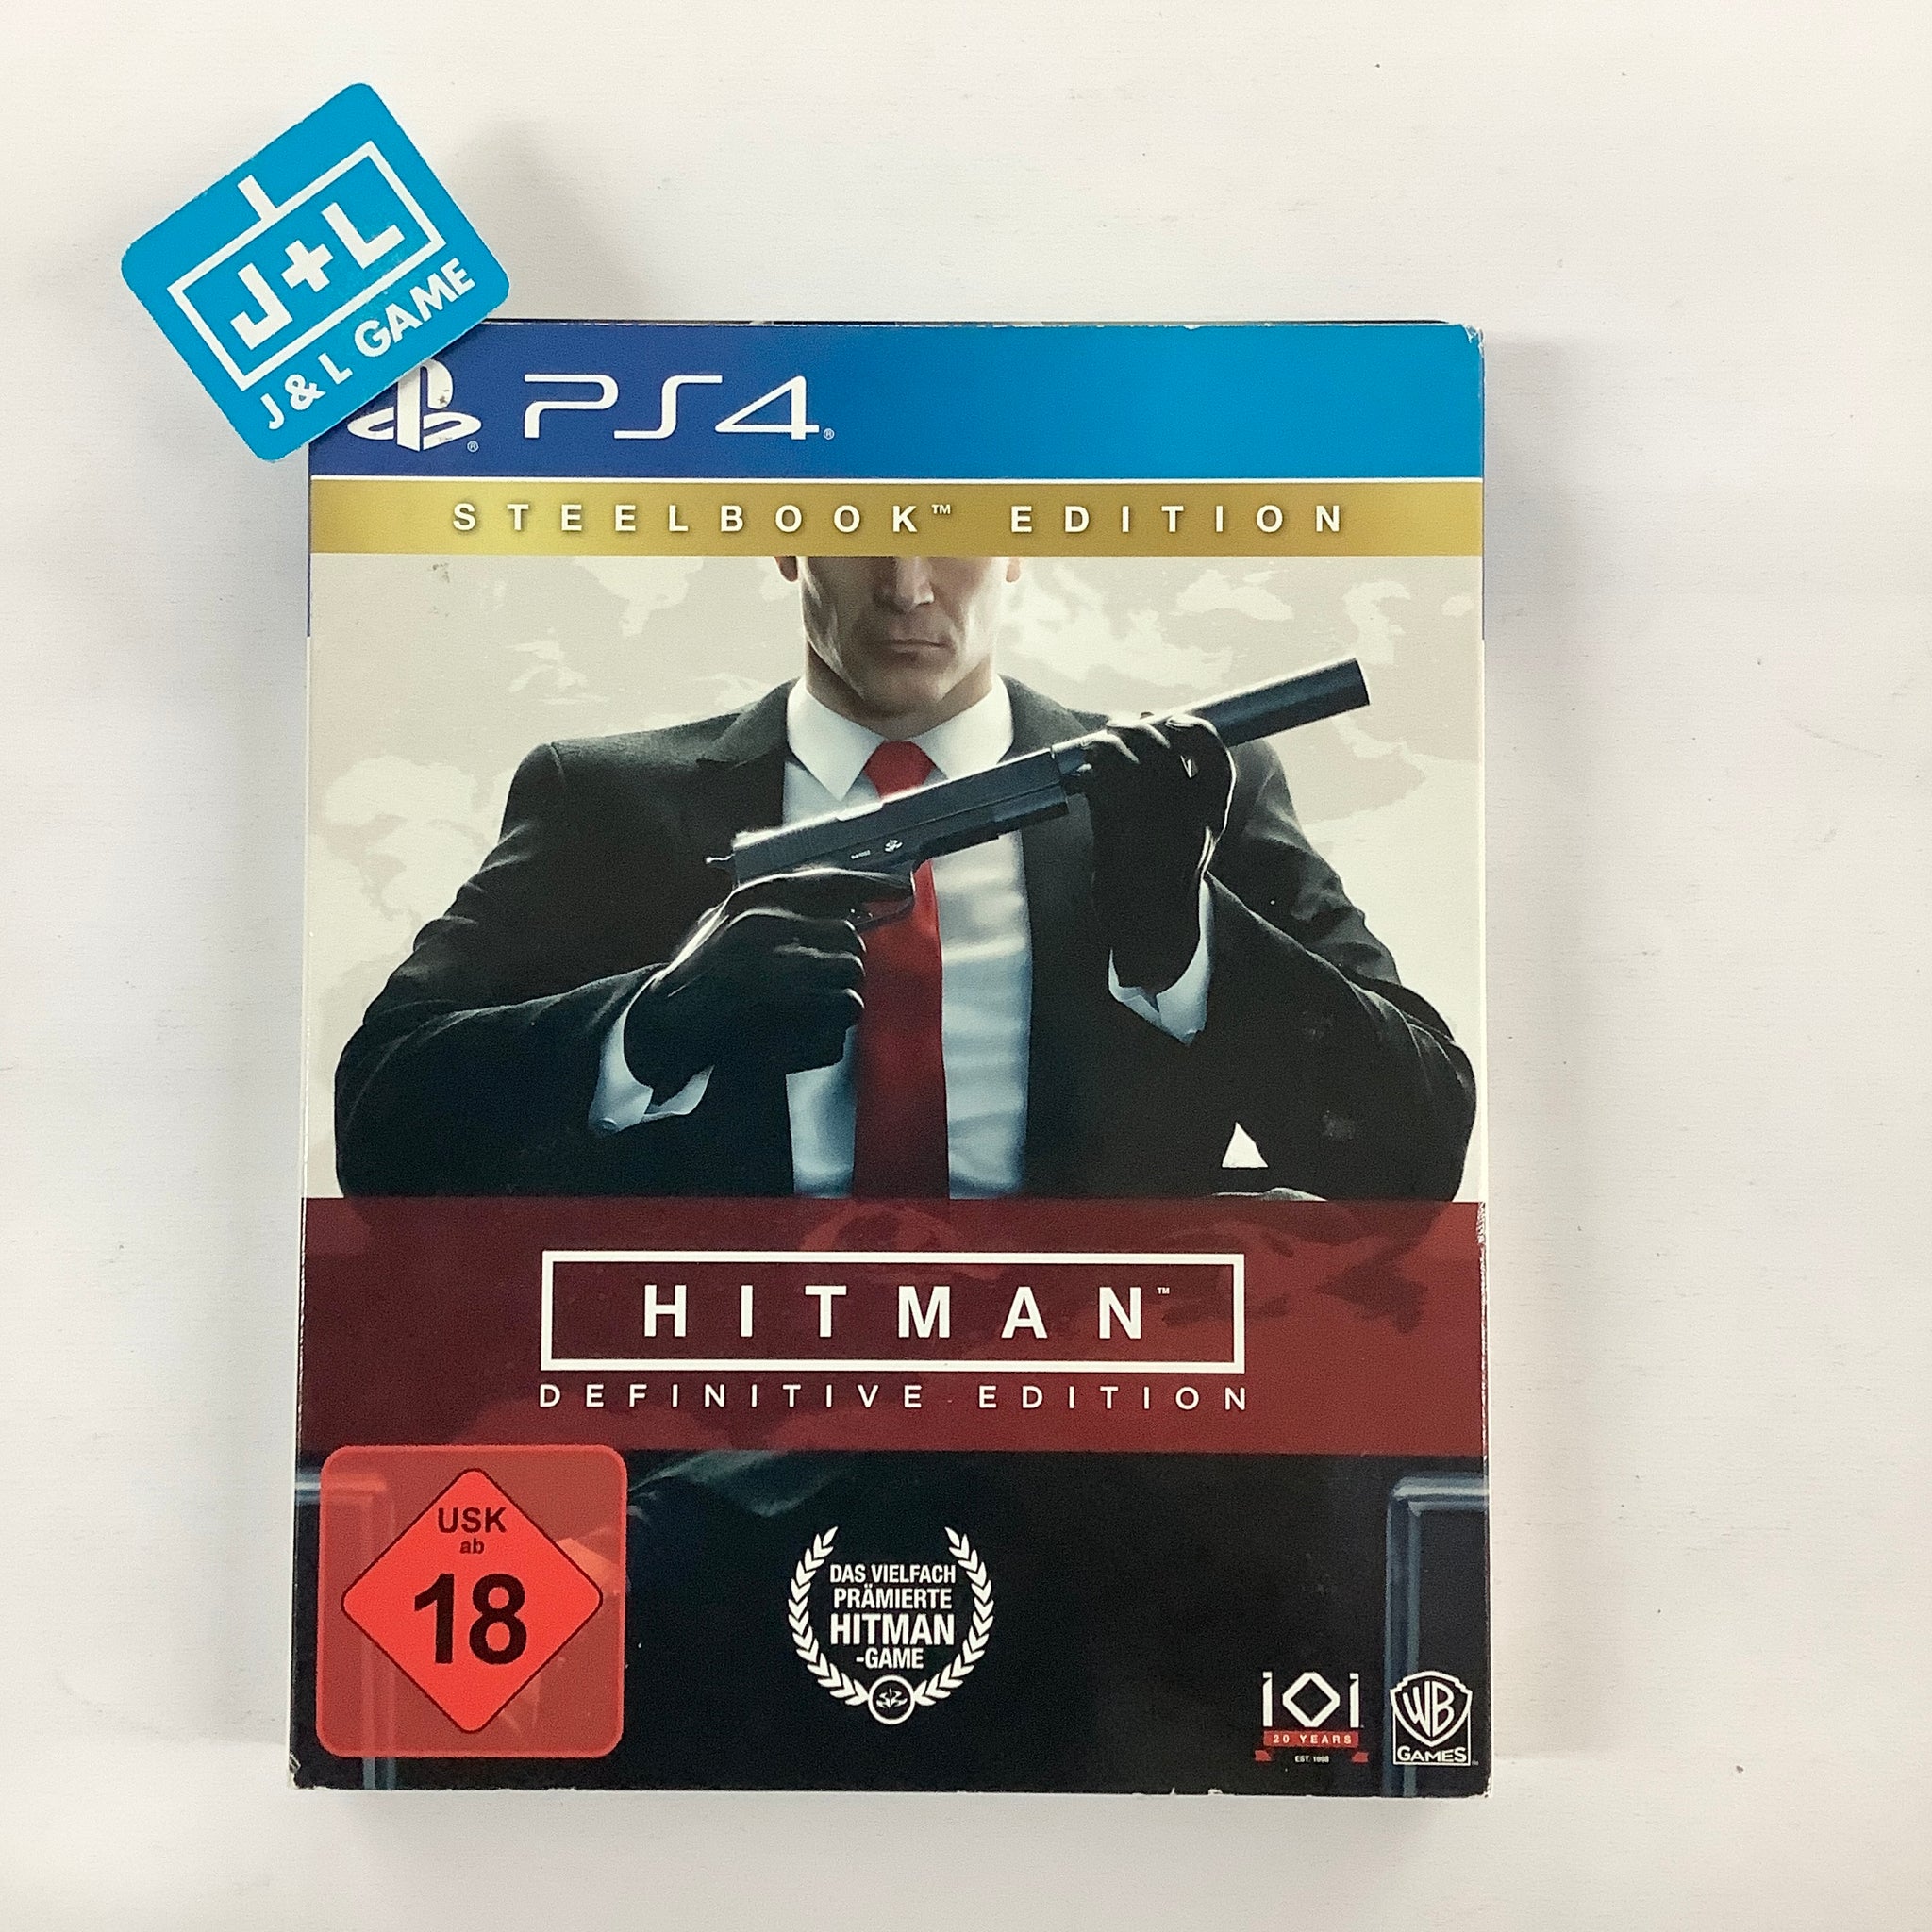 Hitman: Definitive Edition (SteelBook Edition) - (PS4) PlayStation 4 [Pre-Owned] (European Import) Video Games Warner Bros. Interactive Entertainment   